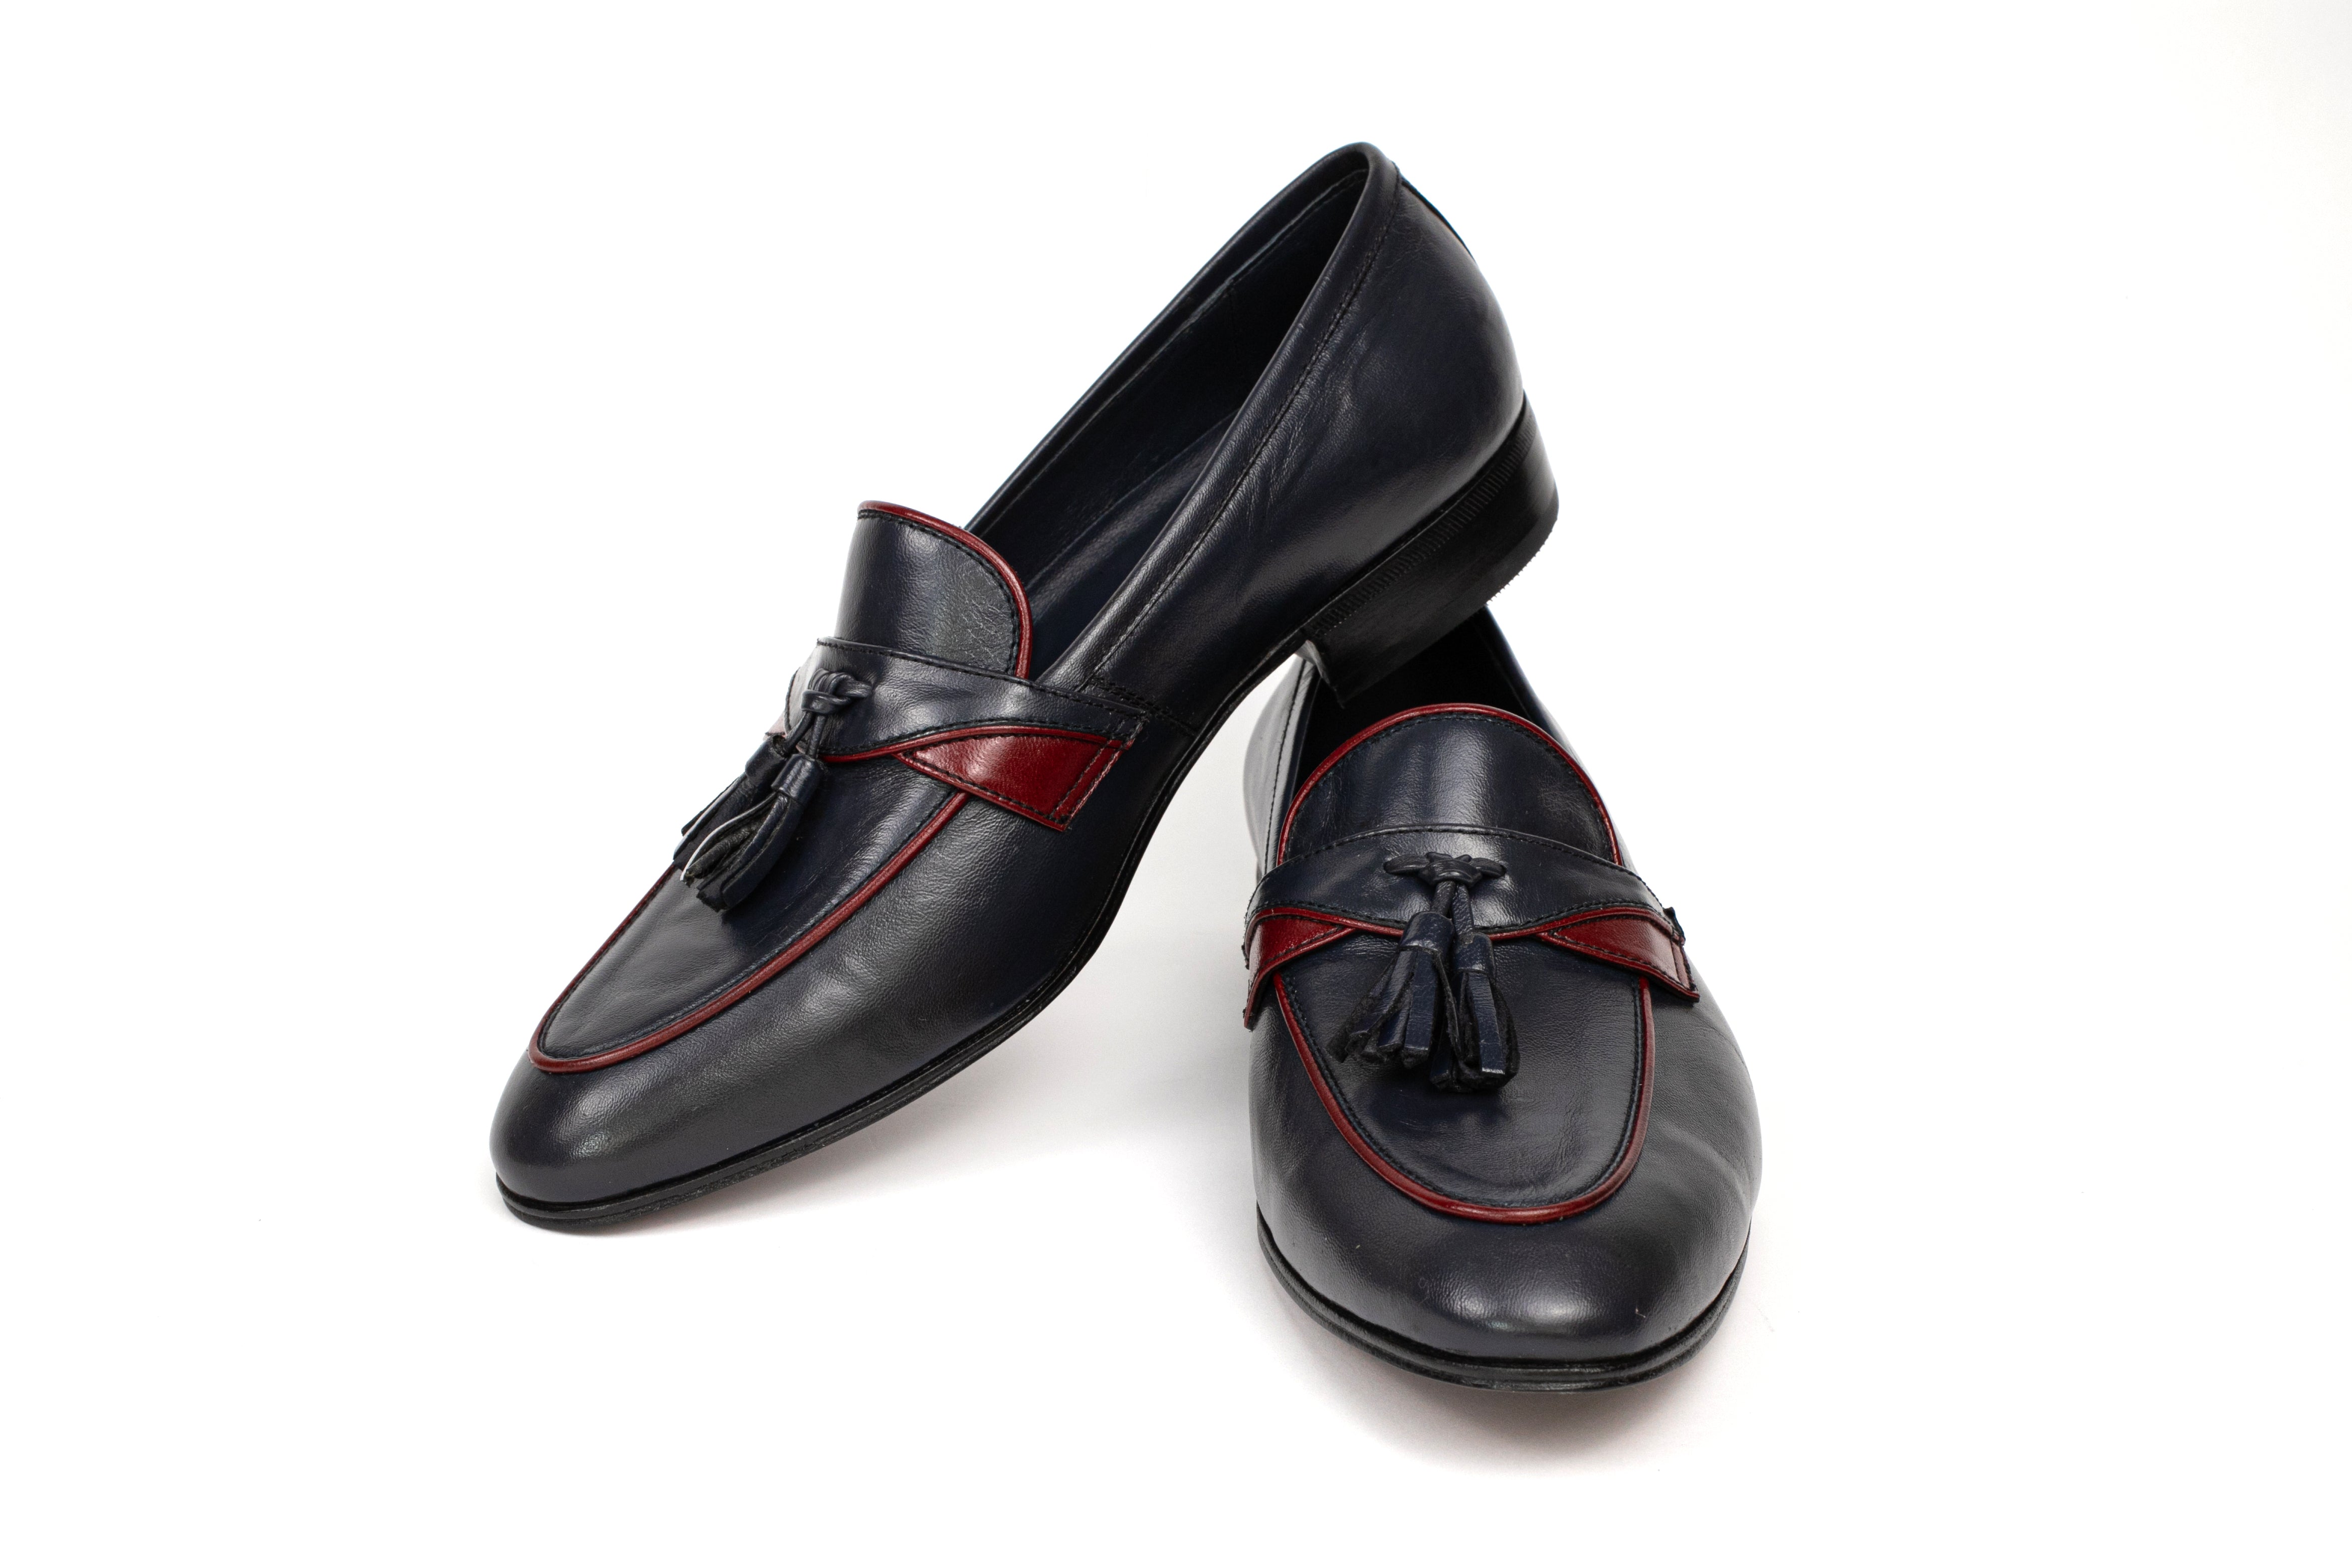 Tassel Loafer created by Pacco - Enrico in Navy Blue with Wine